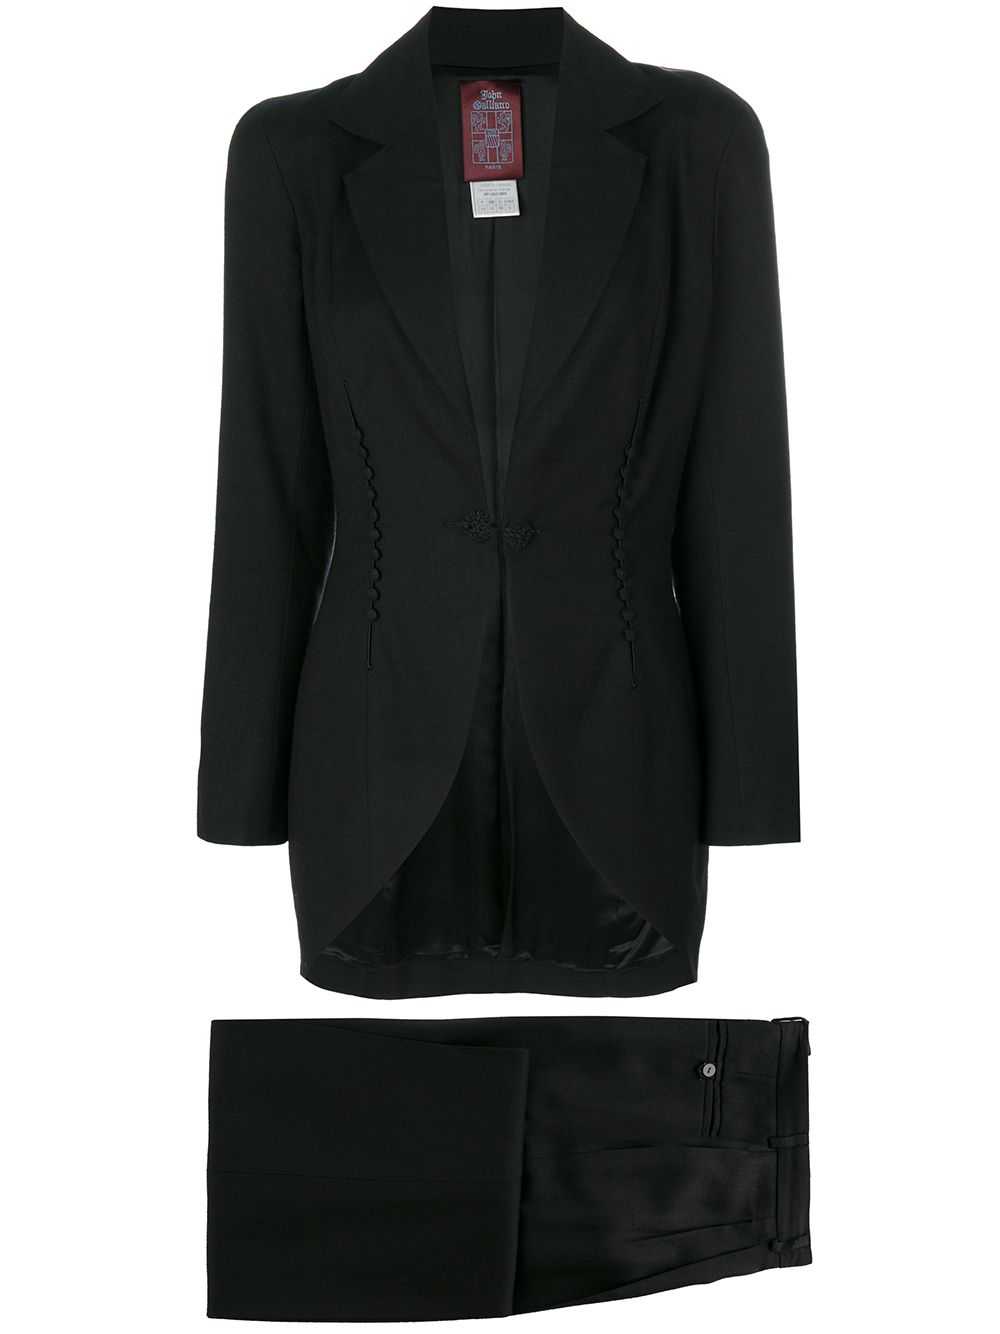 John Galliano Pre-Owned jacket and trouser suit -… - image 1